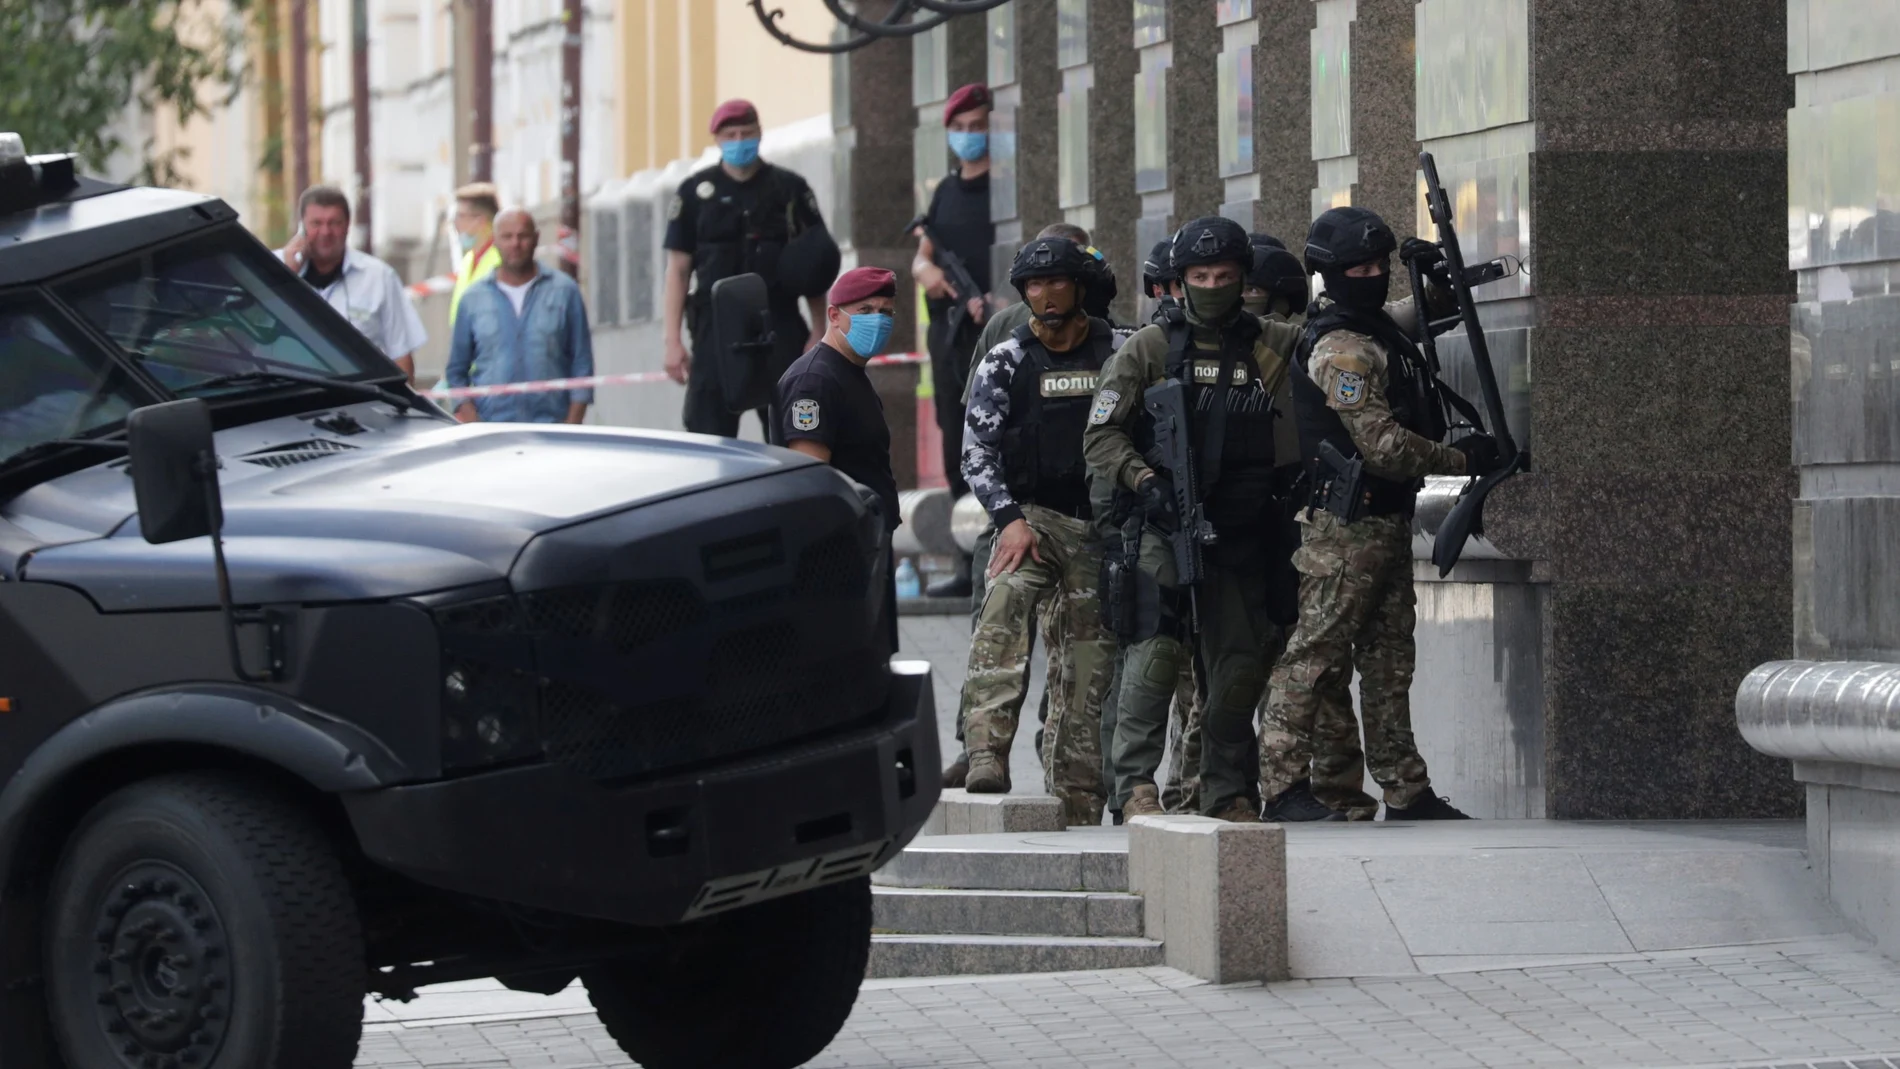 Members of a Ukrainian special forces unit are seen outside a building where an unidentified man reportedly threatens to blow up a bomb in a bank branch, in Kyiv